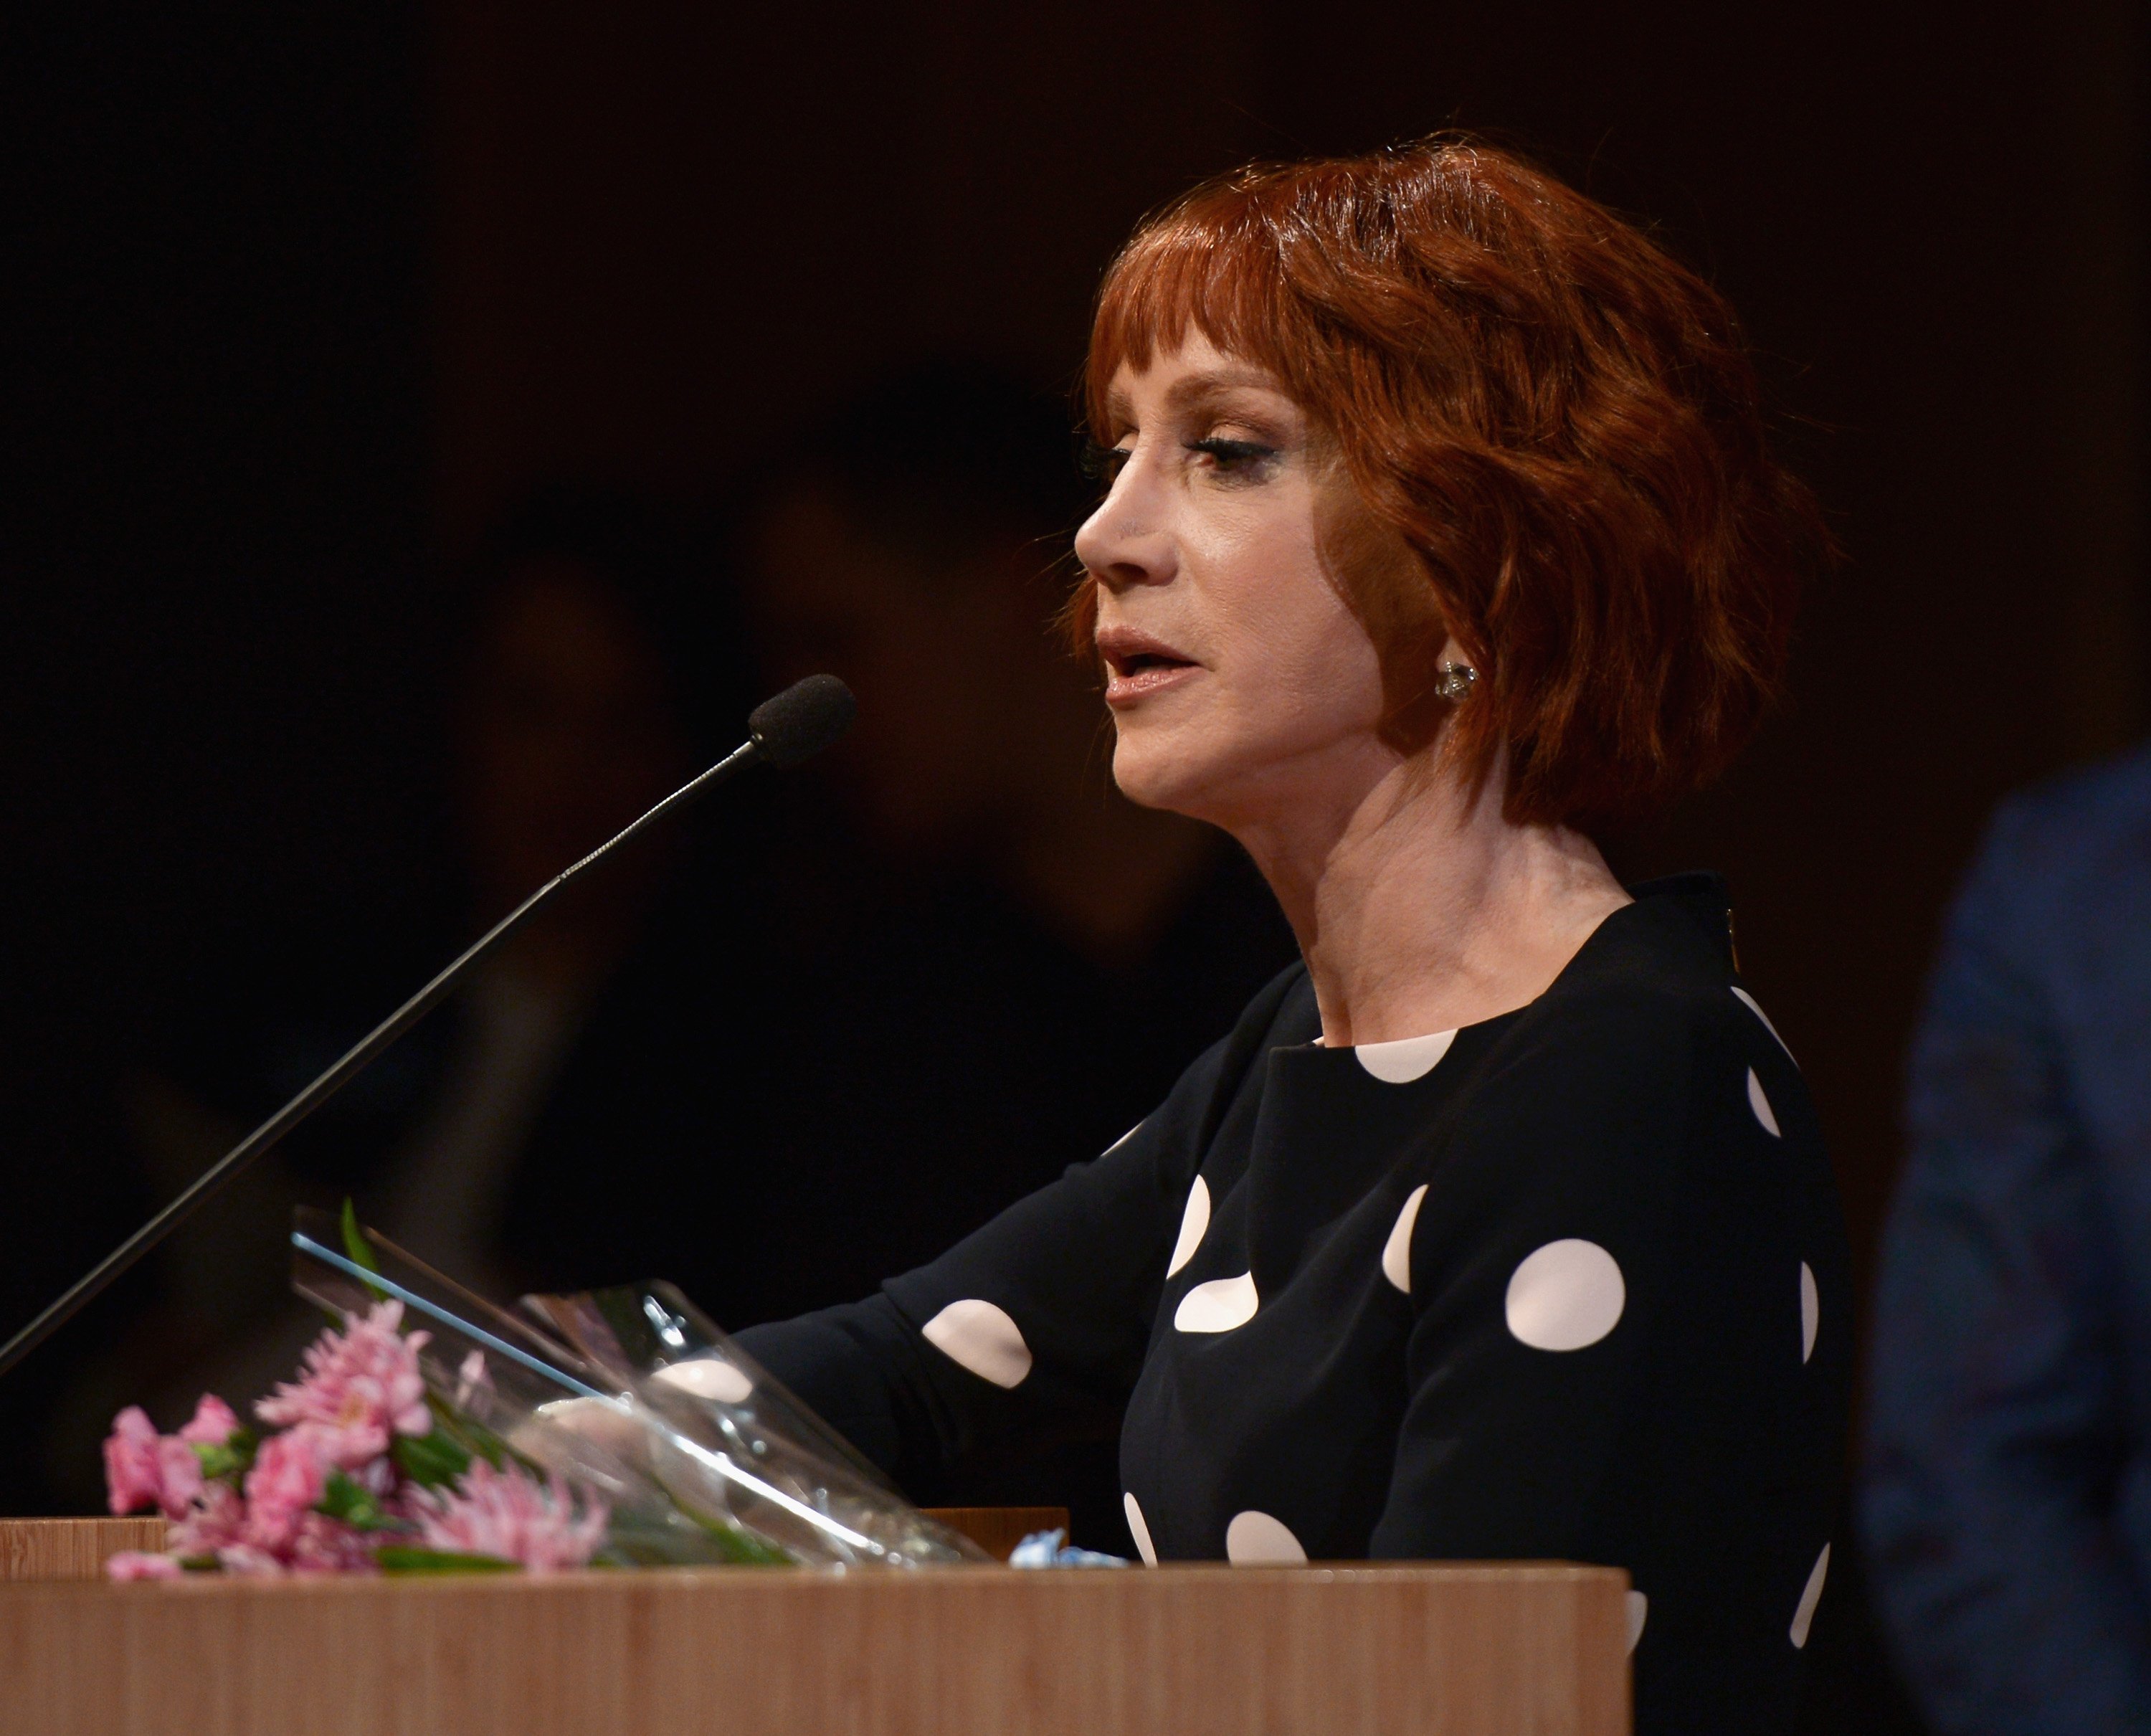 Comedian Kathy Griffin attends the West Hollywood Rainbow Key Awards at City of West Hollywood's Council Chambers on June 5, 2018 in West Hollywood, California | Photo: Getty Images